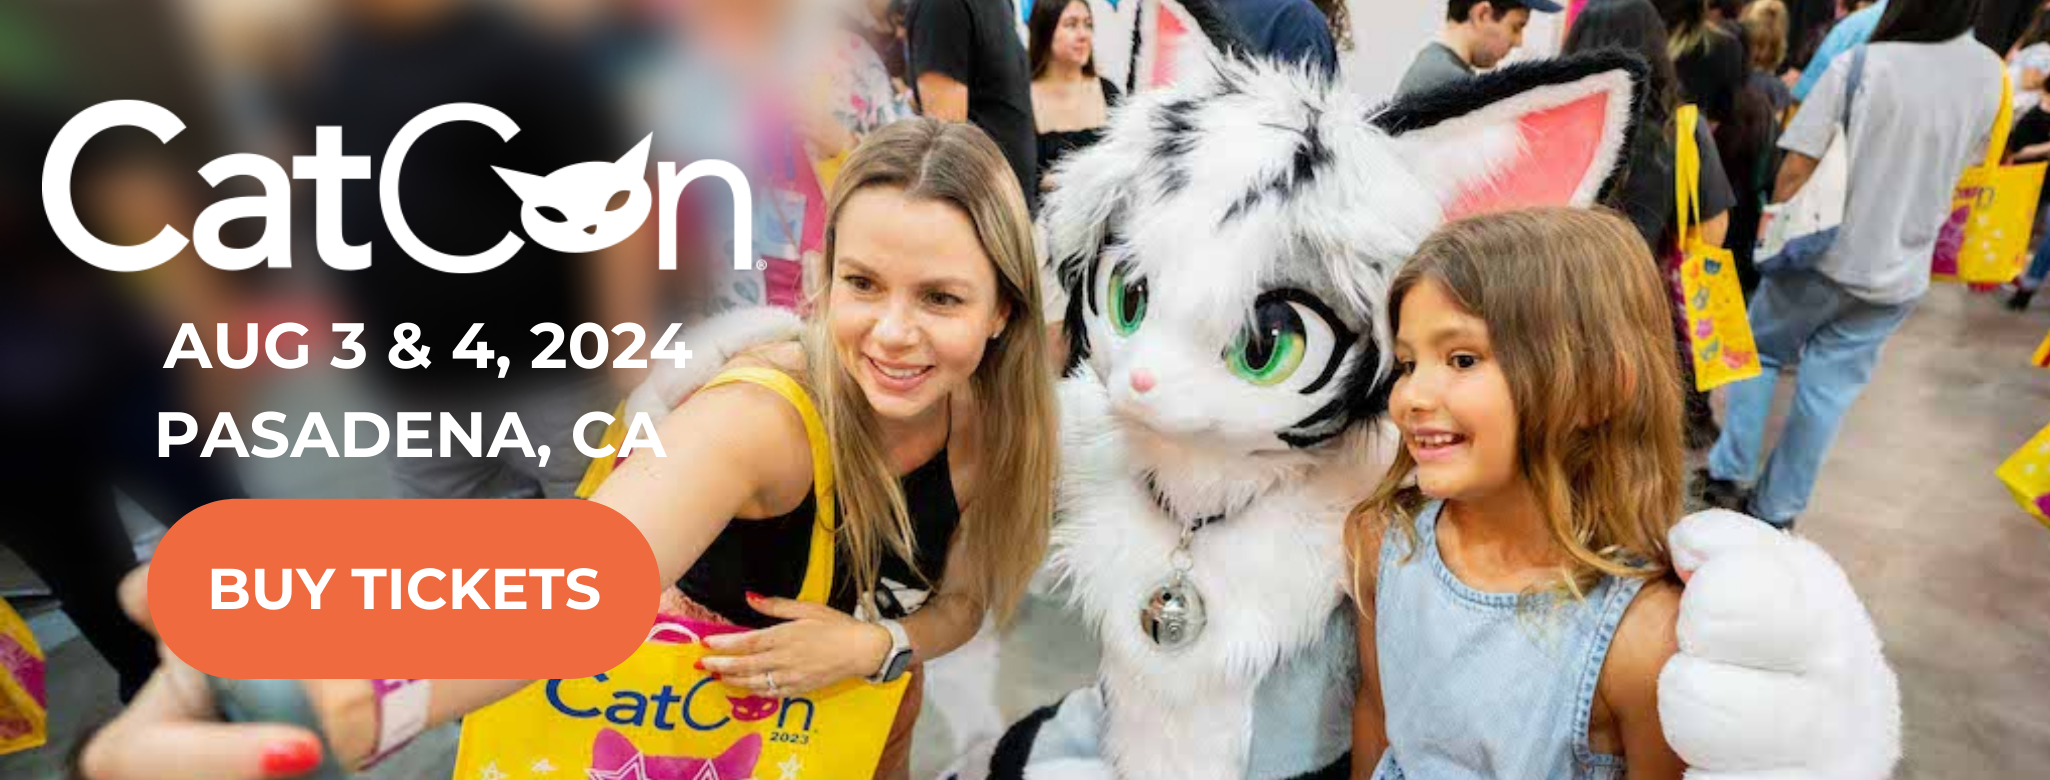 Mom and child selfie with cat cosplayer at CatCon. BUY CATCON 2024 TICKETS NOW!